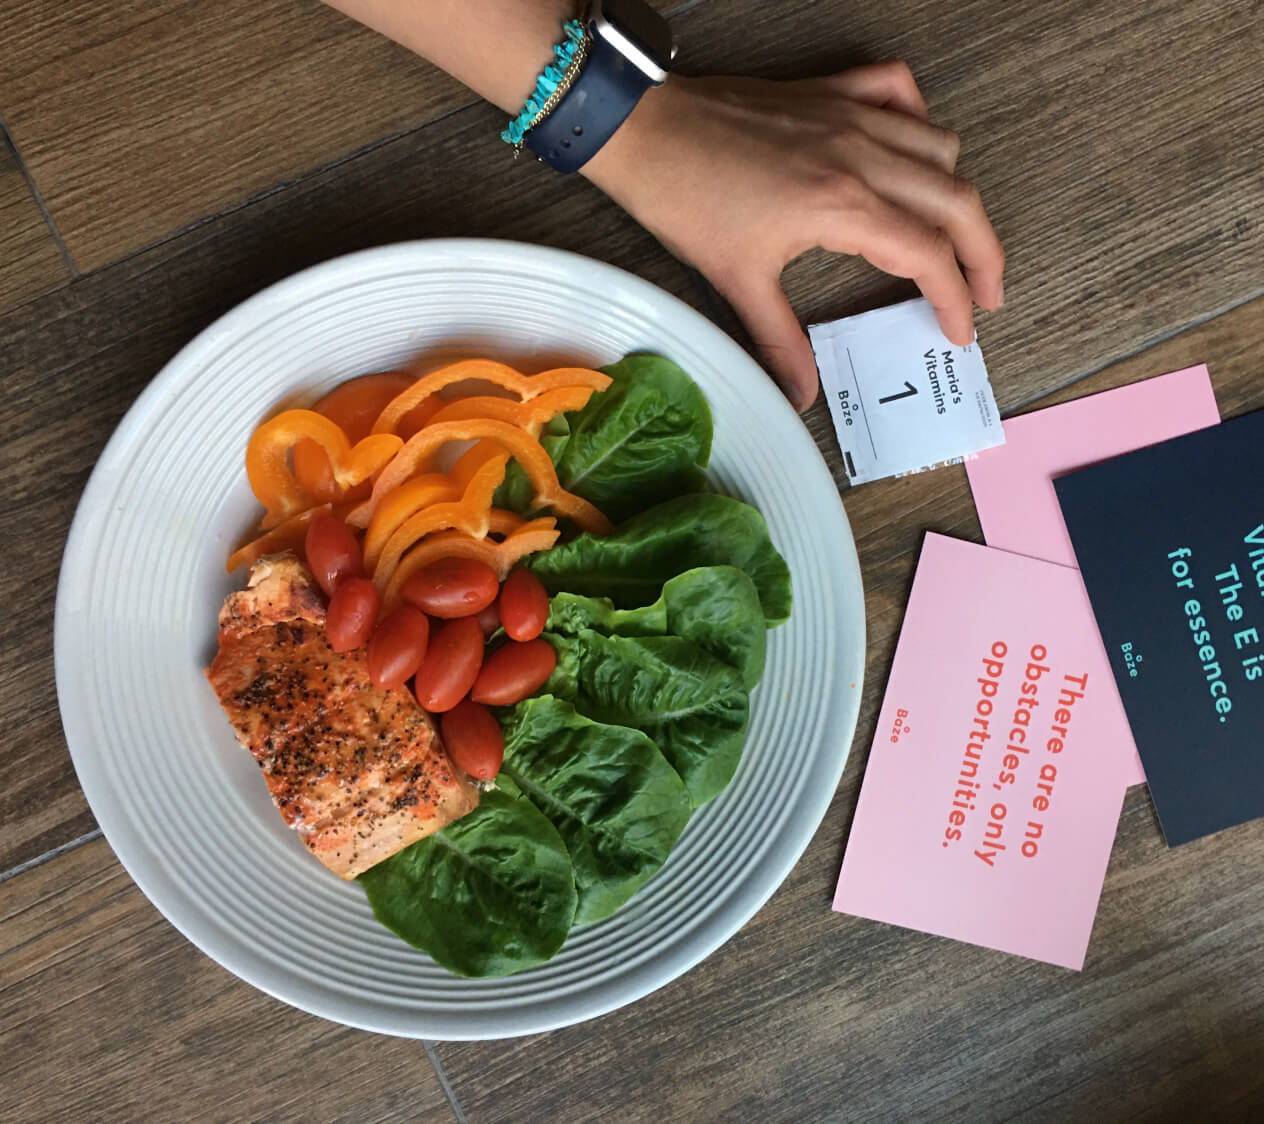 A female hand holding a daily supplement pack titled 'Maria's Vitamins' with a plate of colorful vegetables and salmon sitting in the background